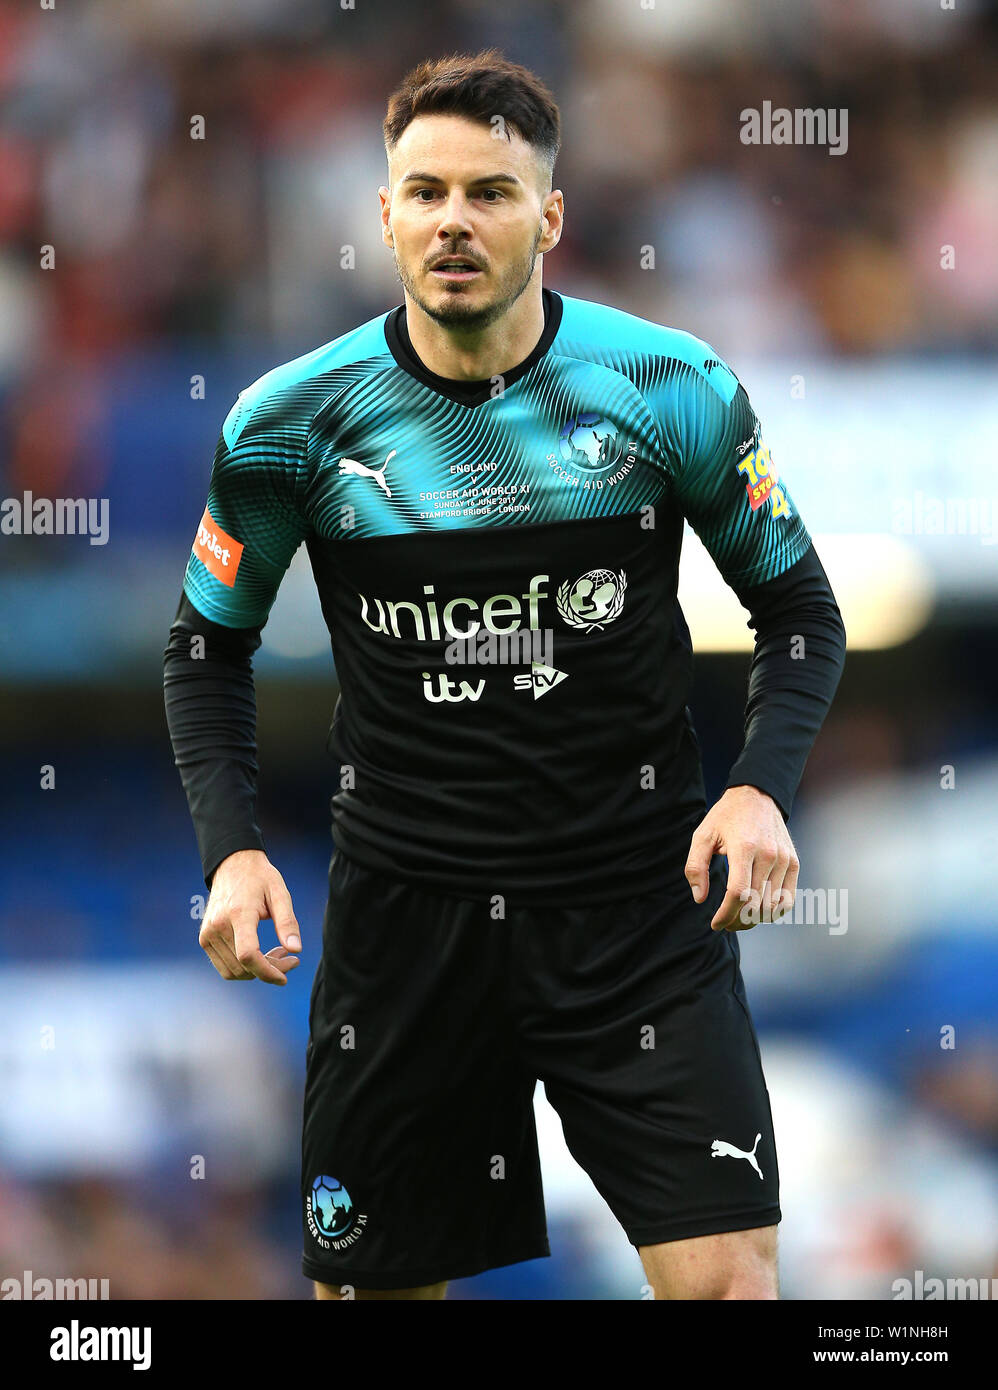 Billy wingrove hi-res stock photography and images - Alamy